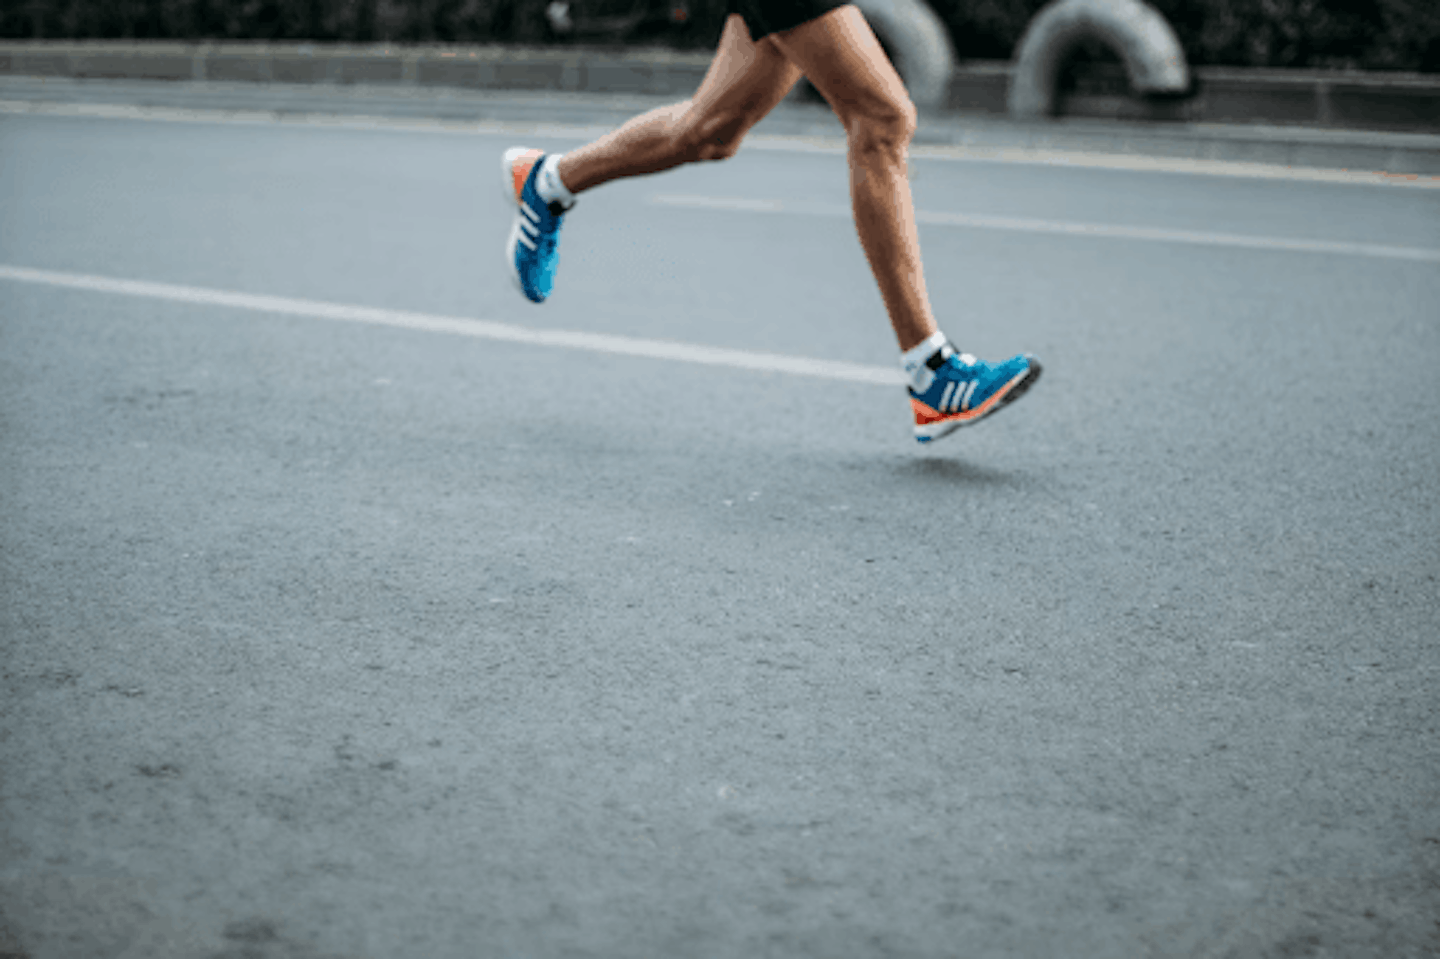 How to start a running routine for beginners